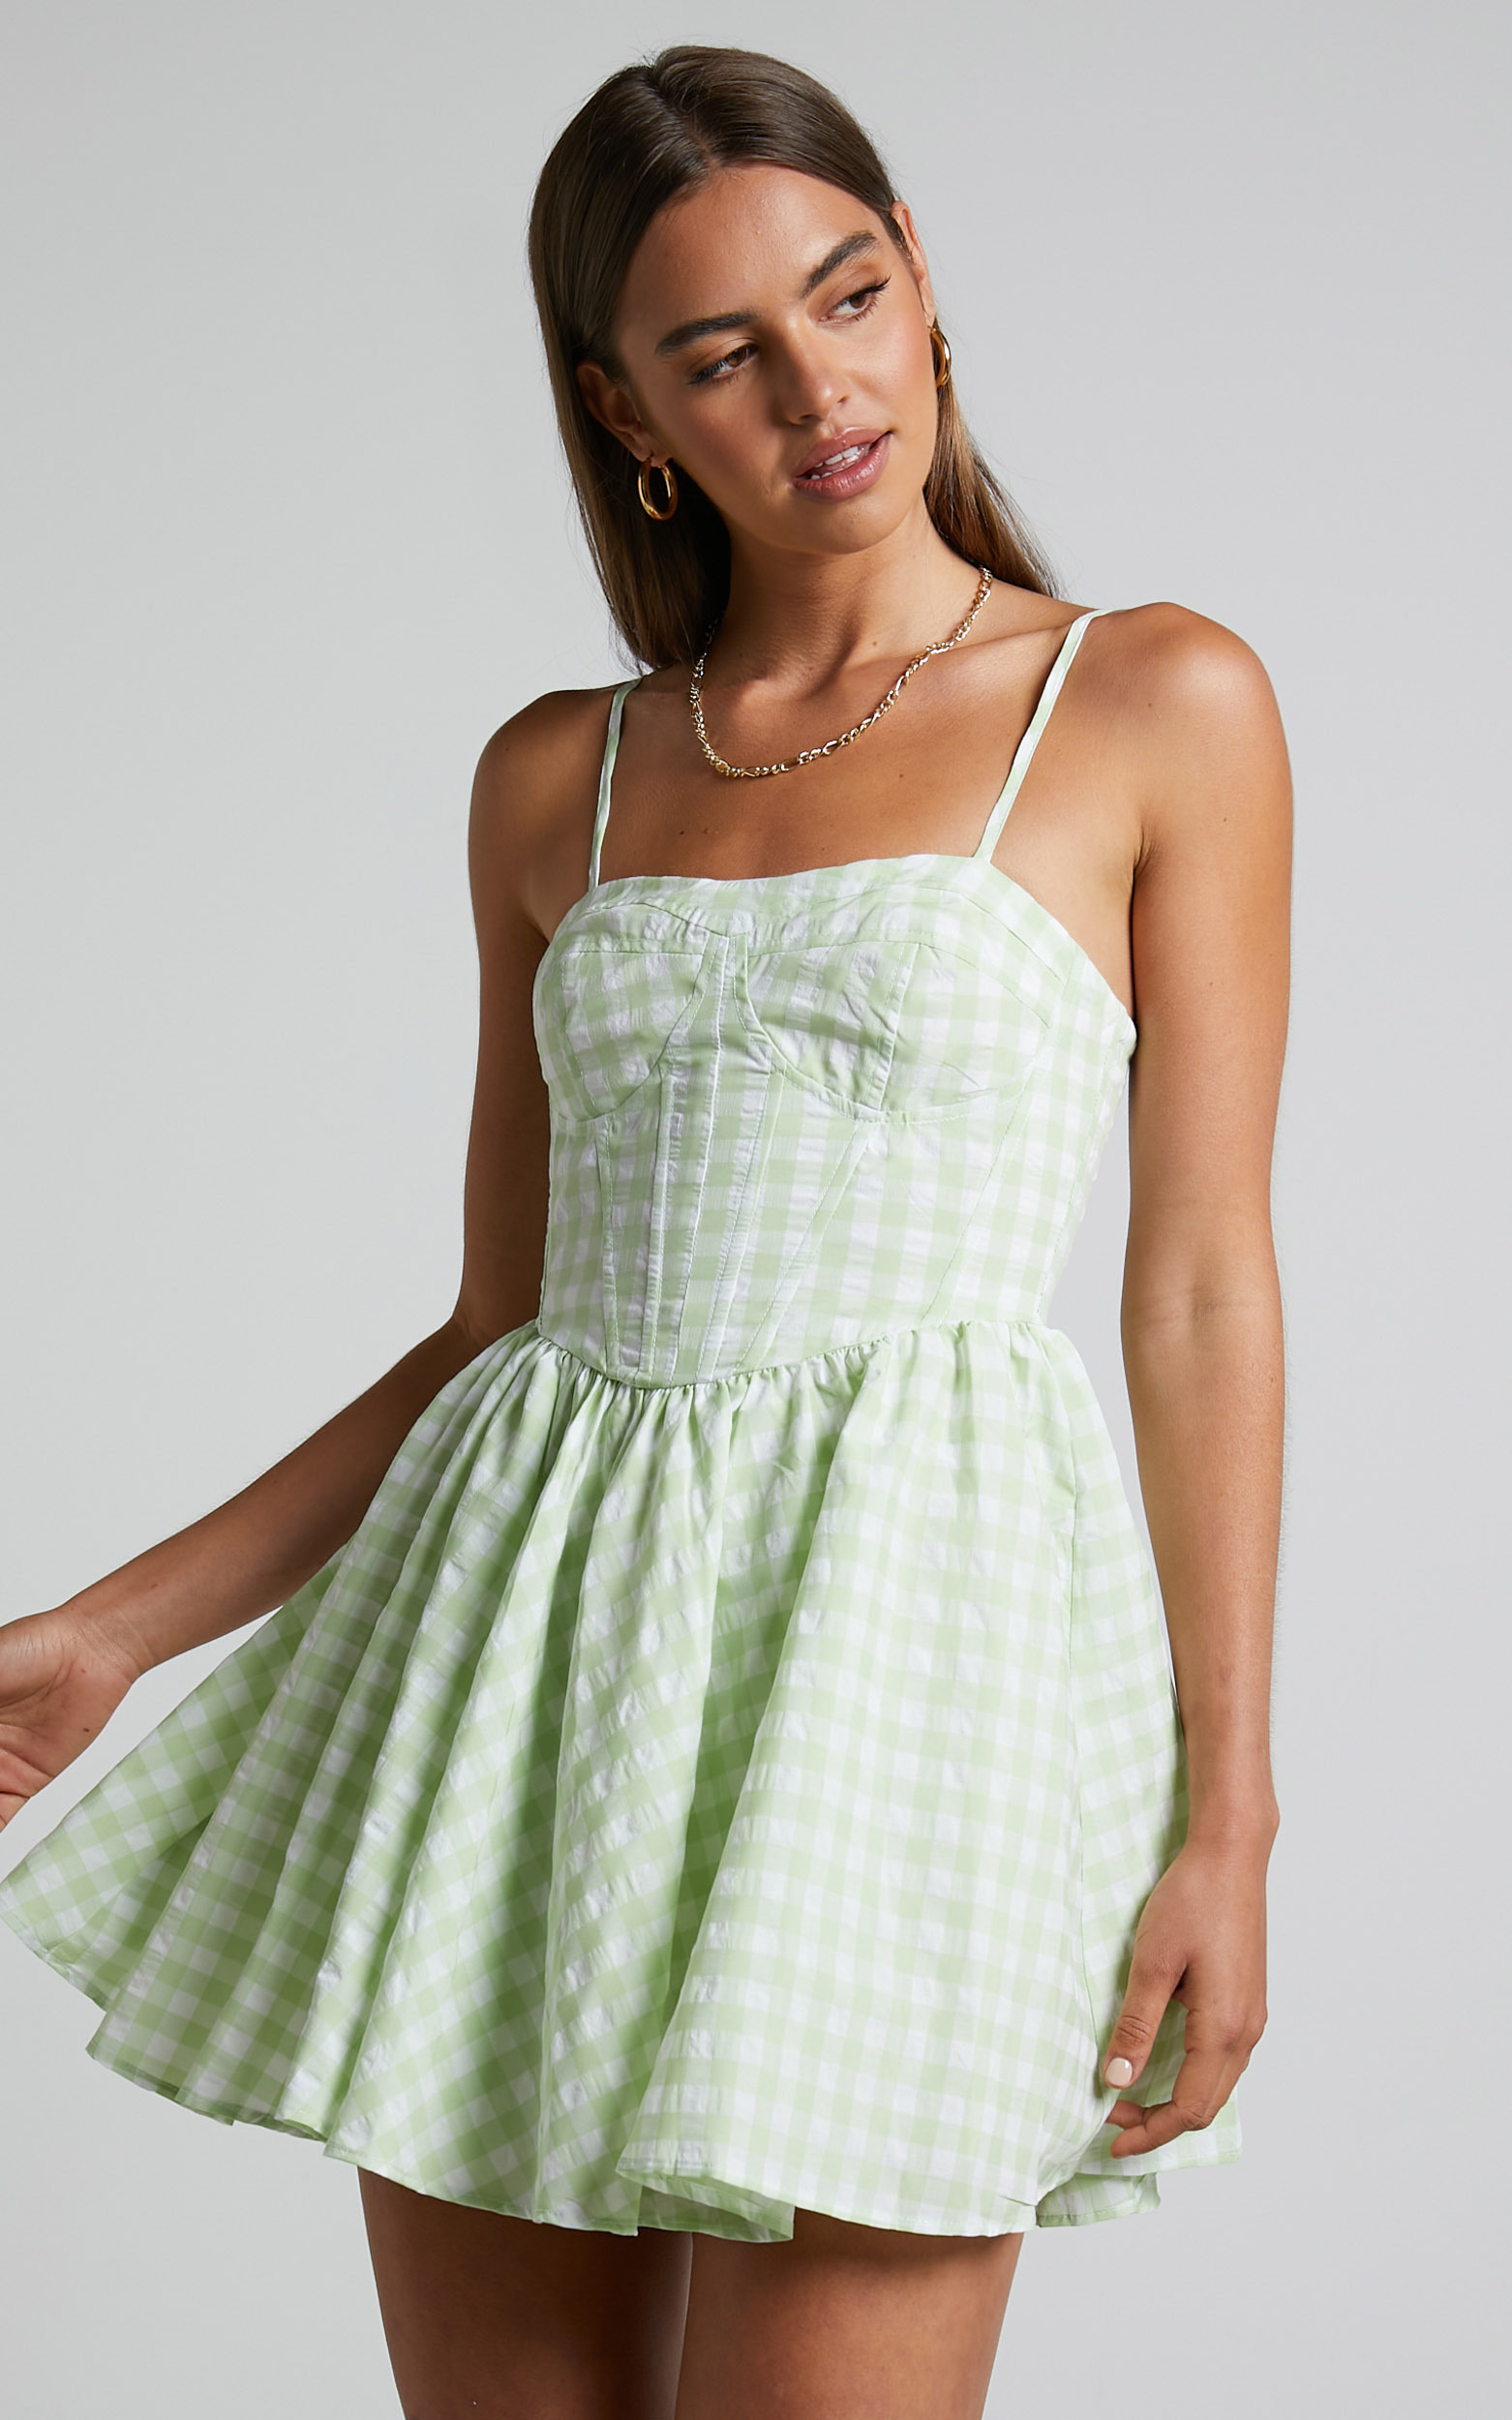 Madelyn Mini Dress - Fit and Flare Corset Dress in Mint Green Gingham - 06, GRN1, hi-res image number null